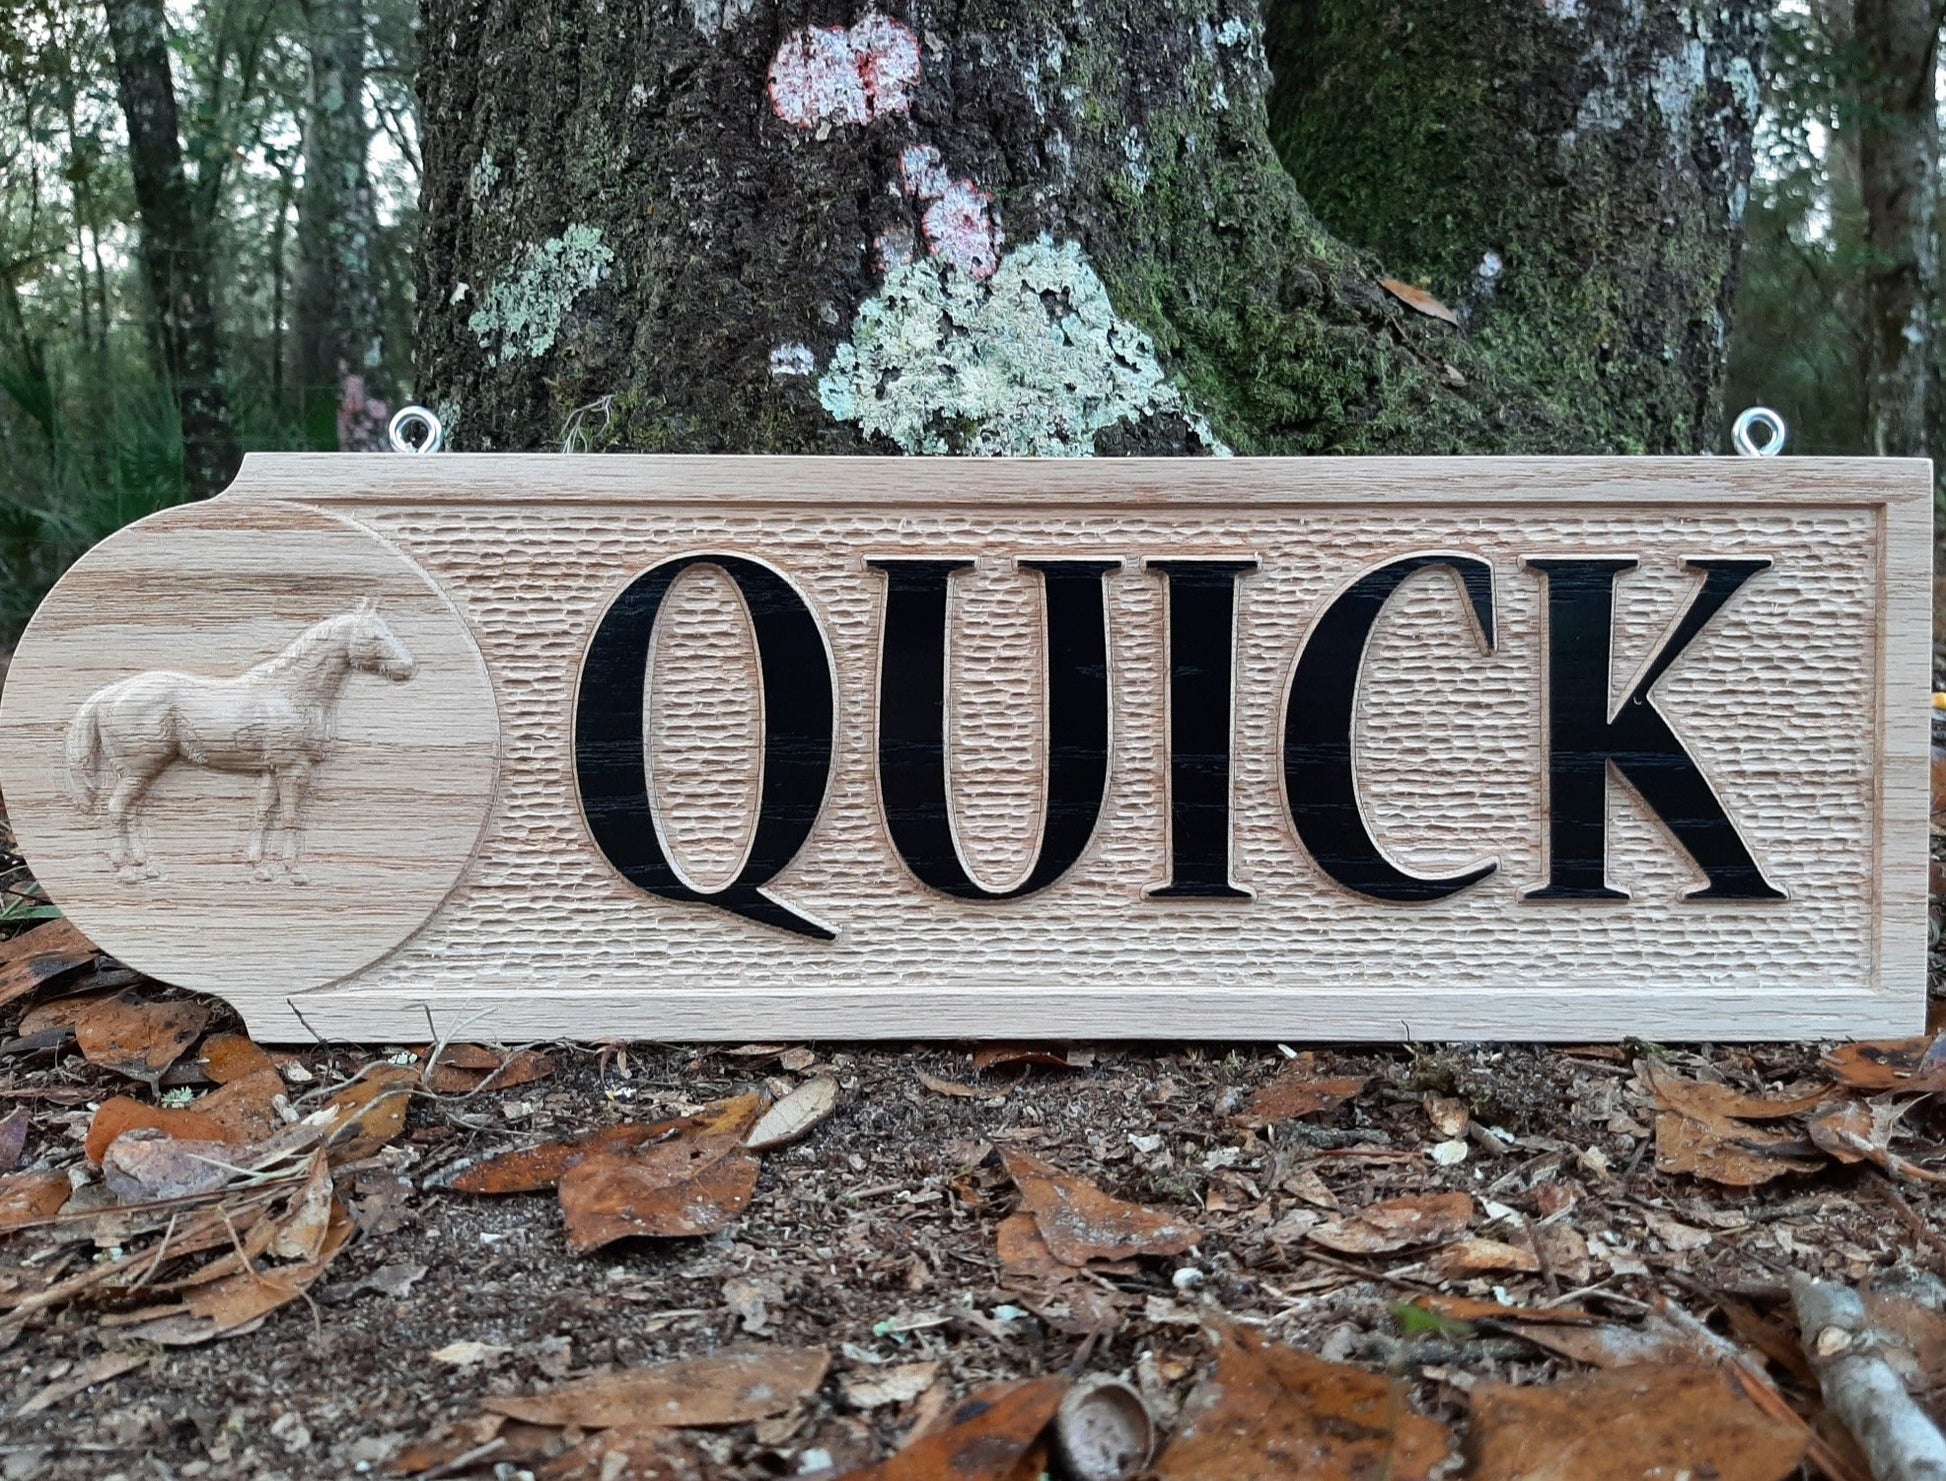 3D wood carved red oak stall sign